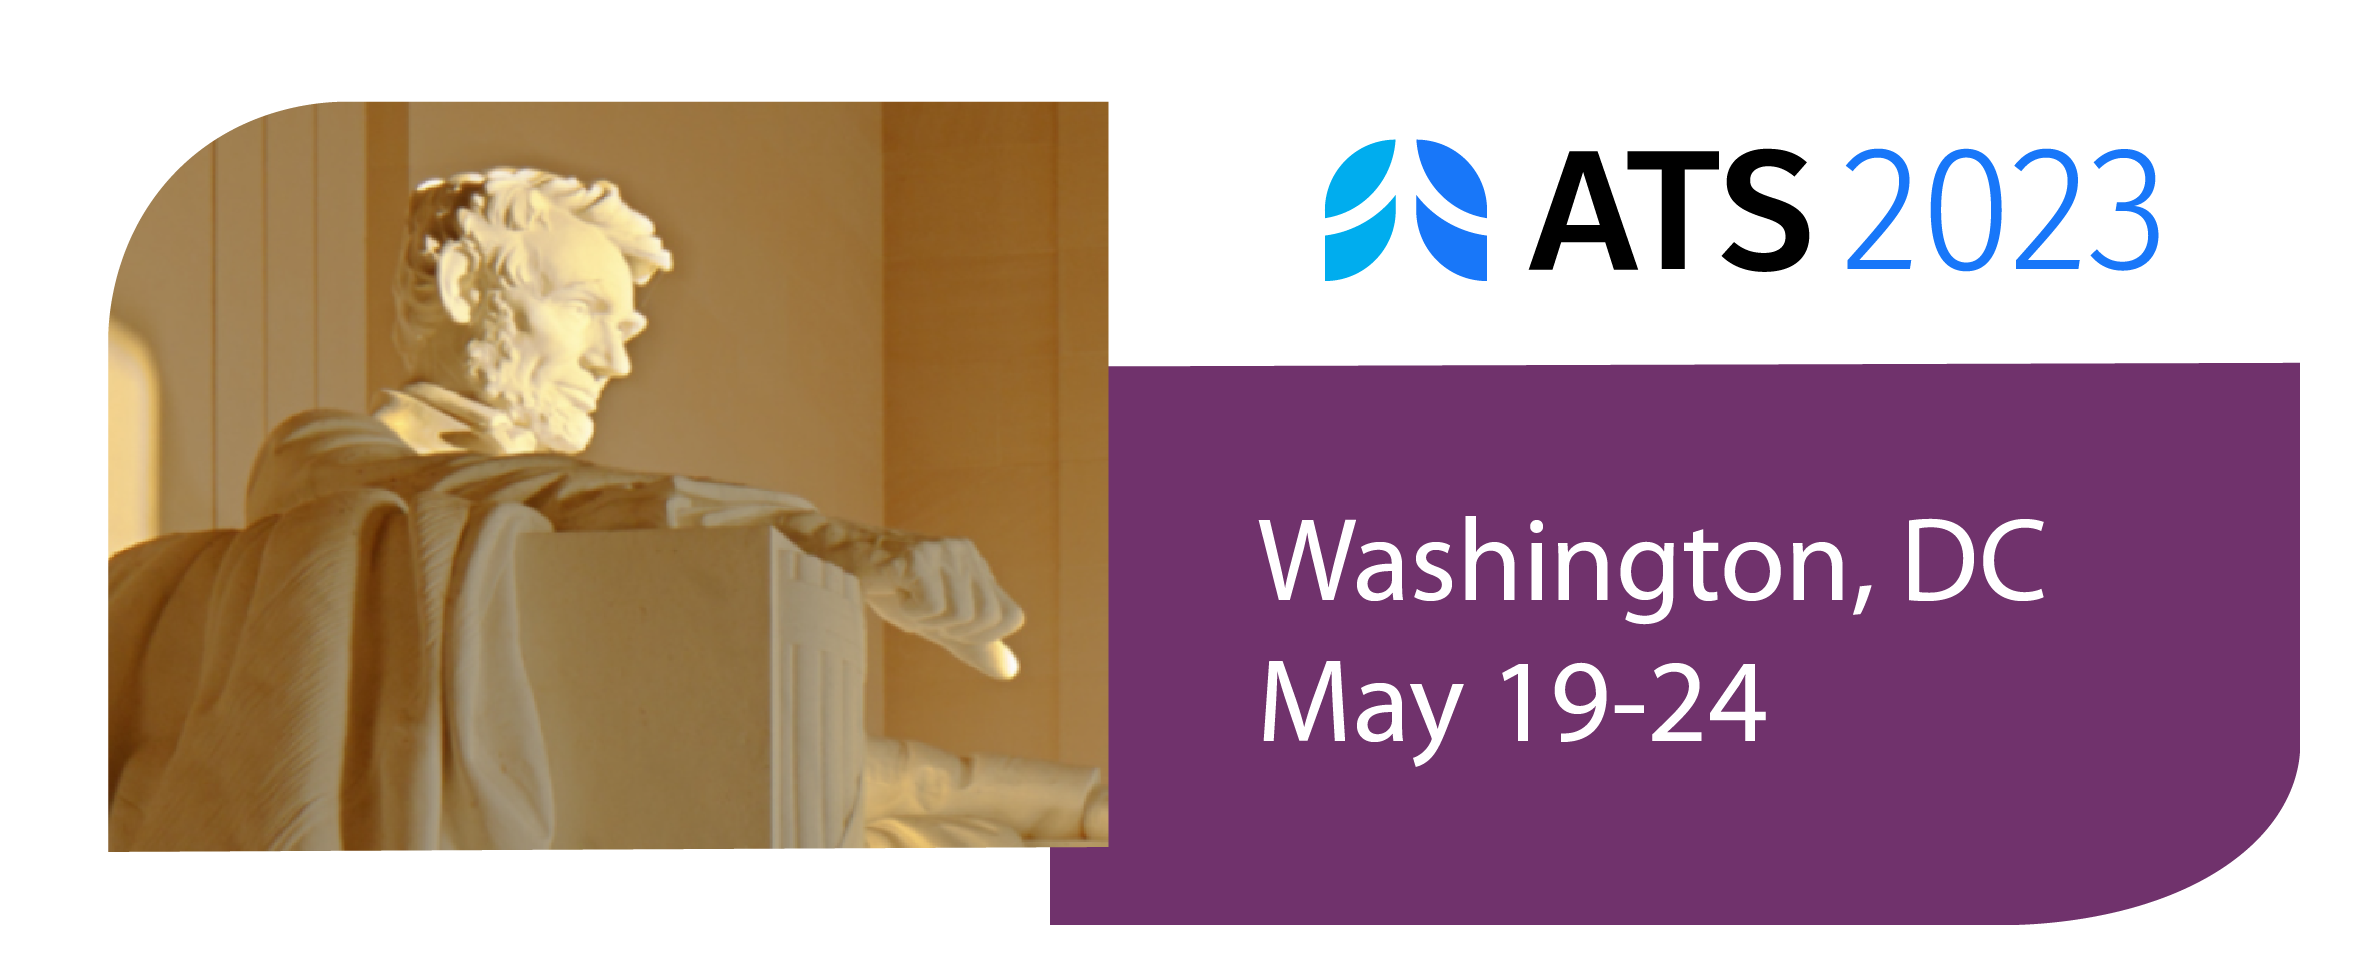 The American Thoracic Society International Conference - ATS 2023